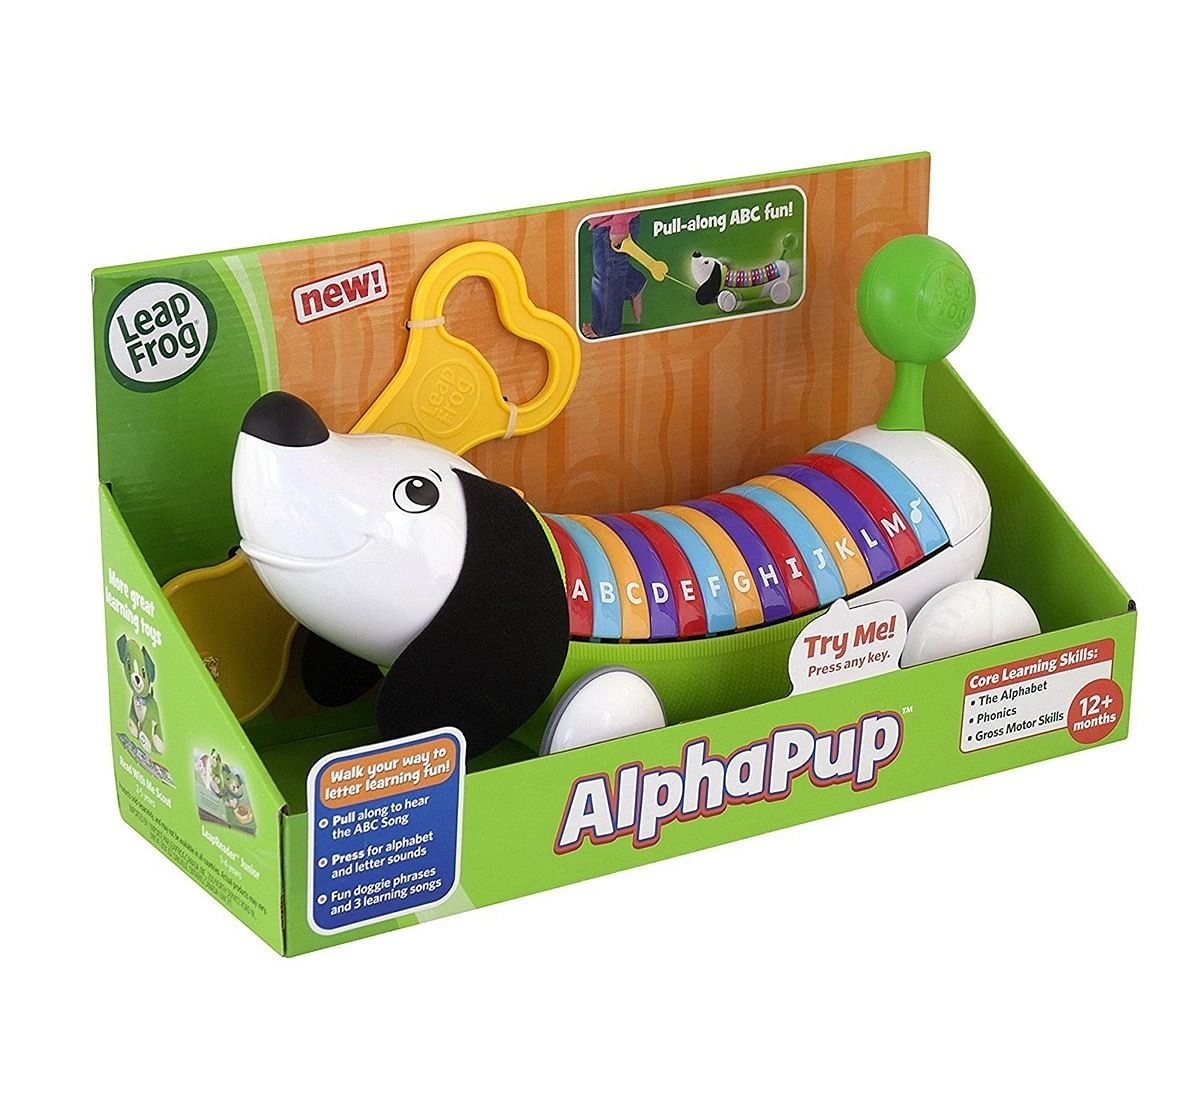  Leapfrog Alphapup Scout, Multi Color Learning Toys for Kids age 12M+ 